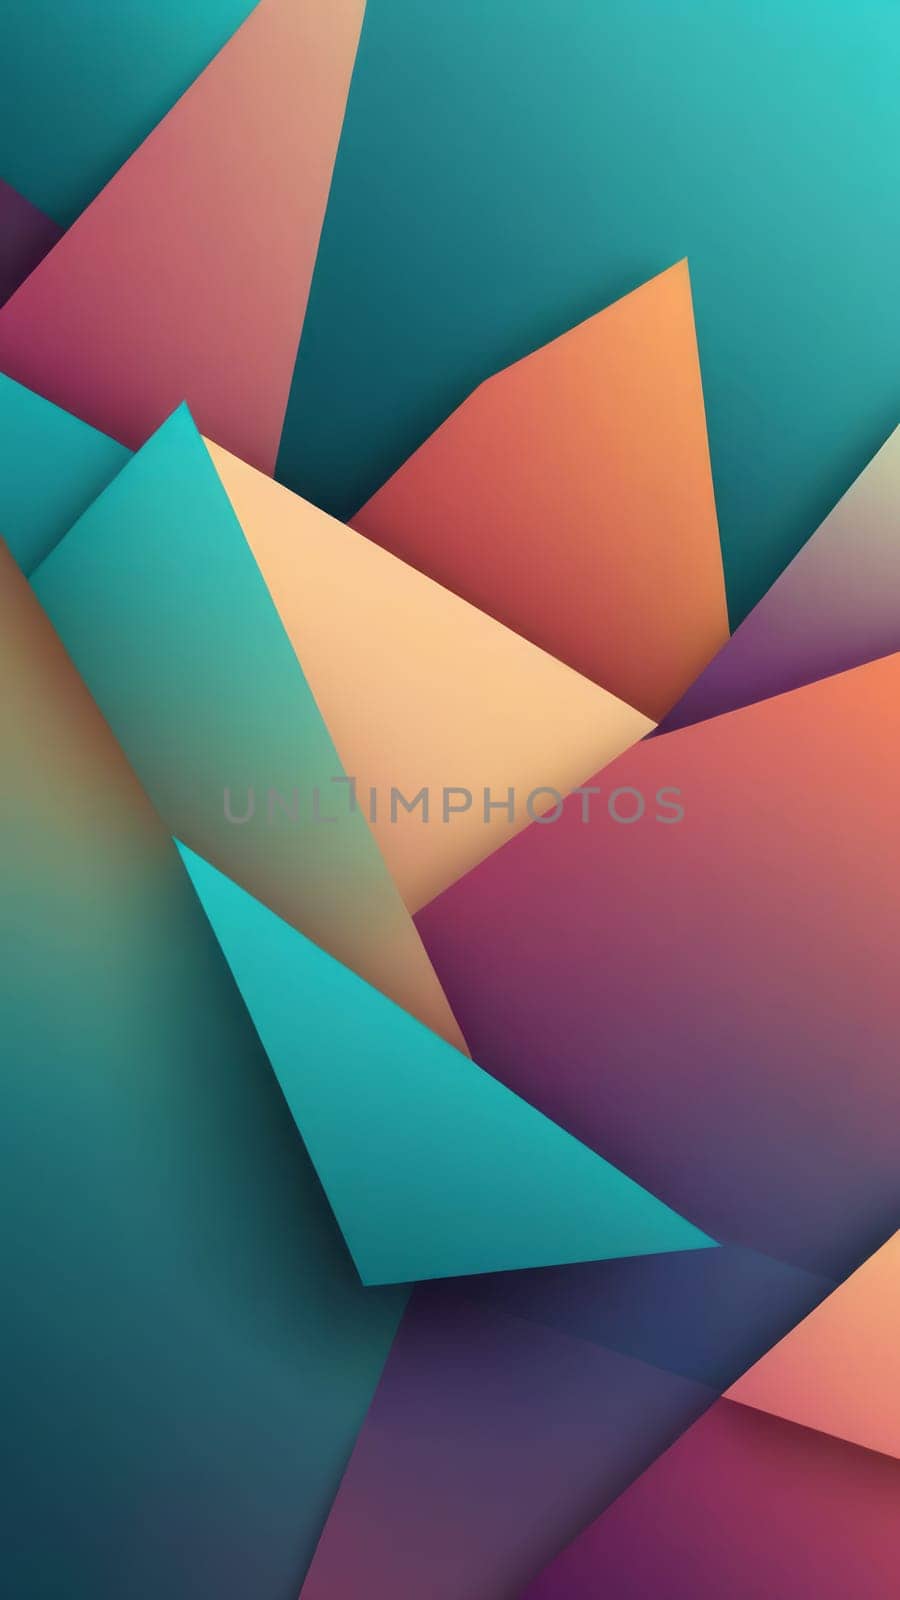 Background from Patched shapes and teal by nkotlyar